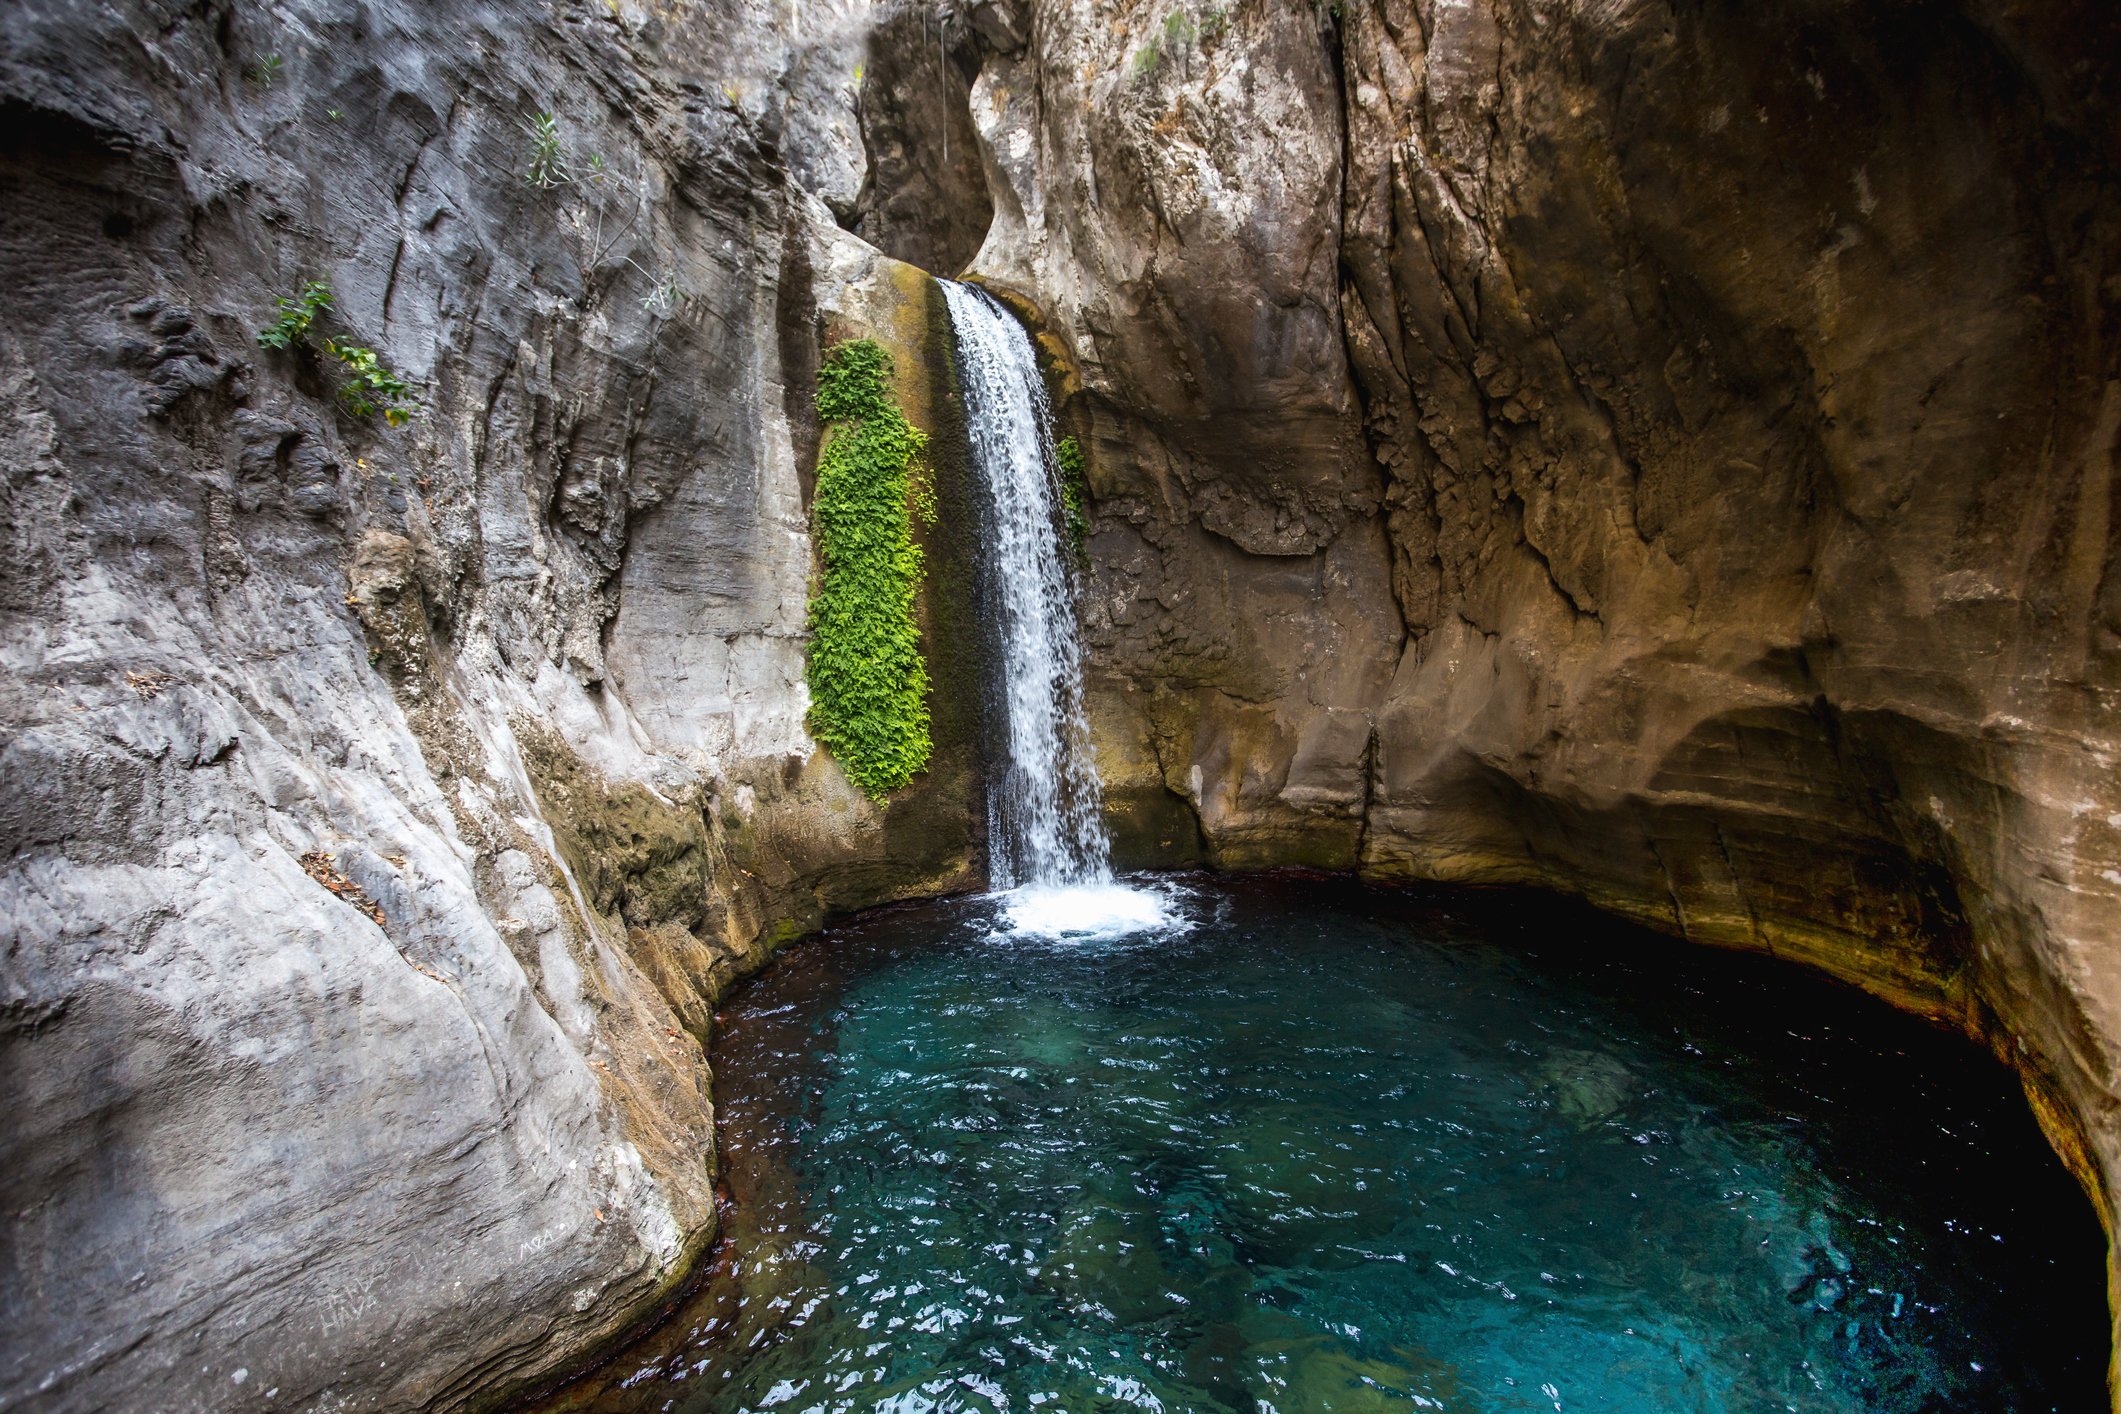 The Sapadere canyon in Alanya is a magical place with its pristine waters. (iStock Photo)